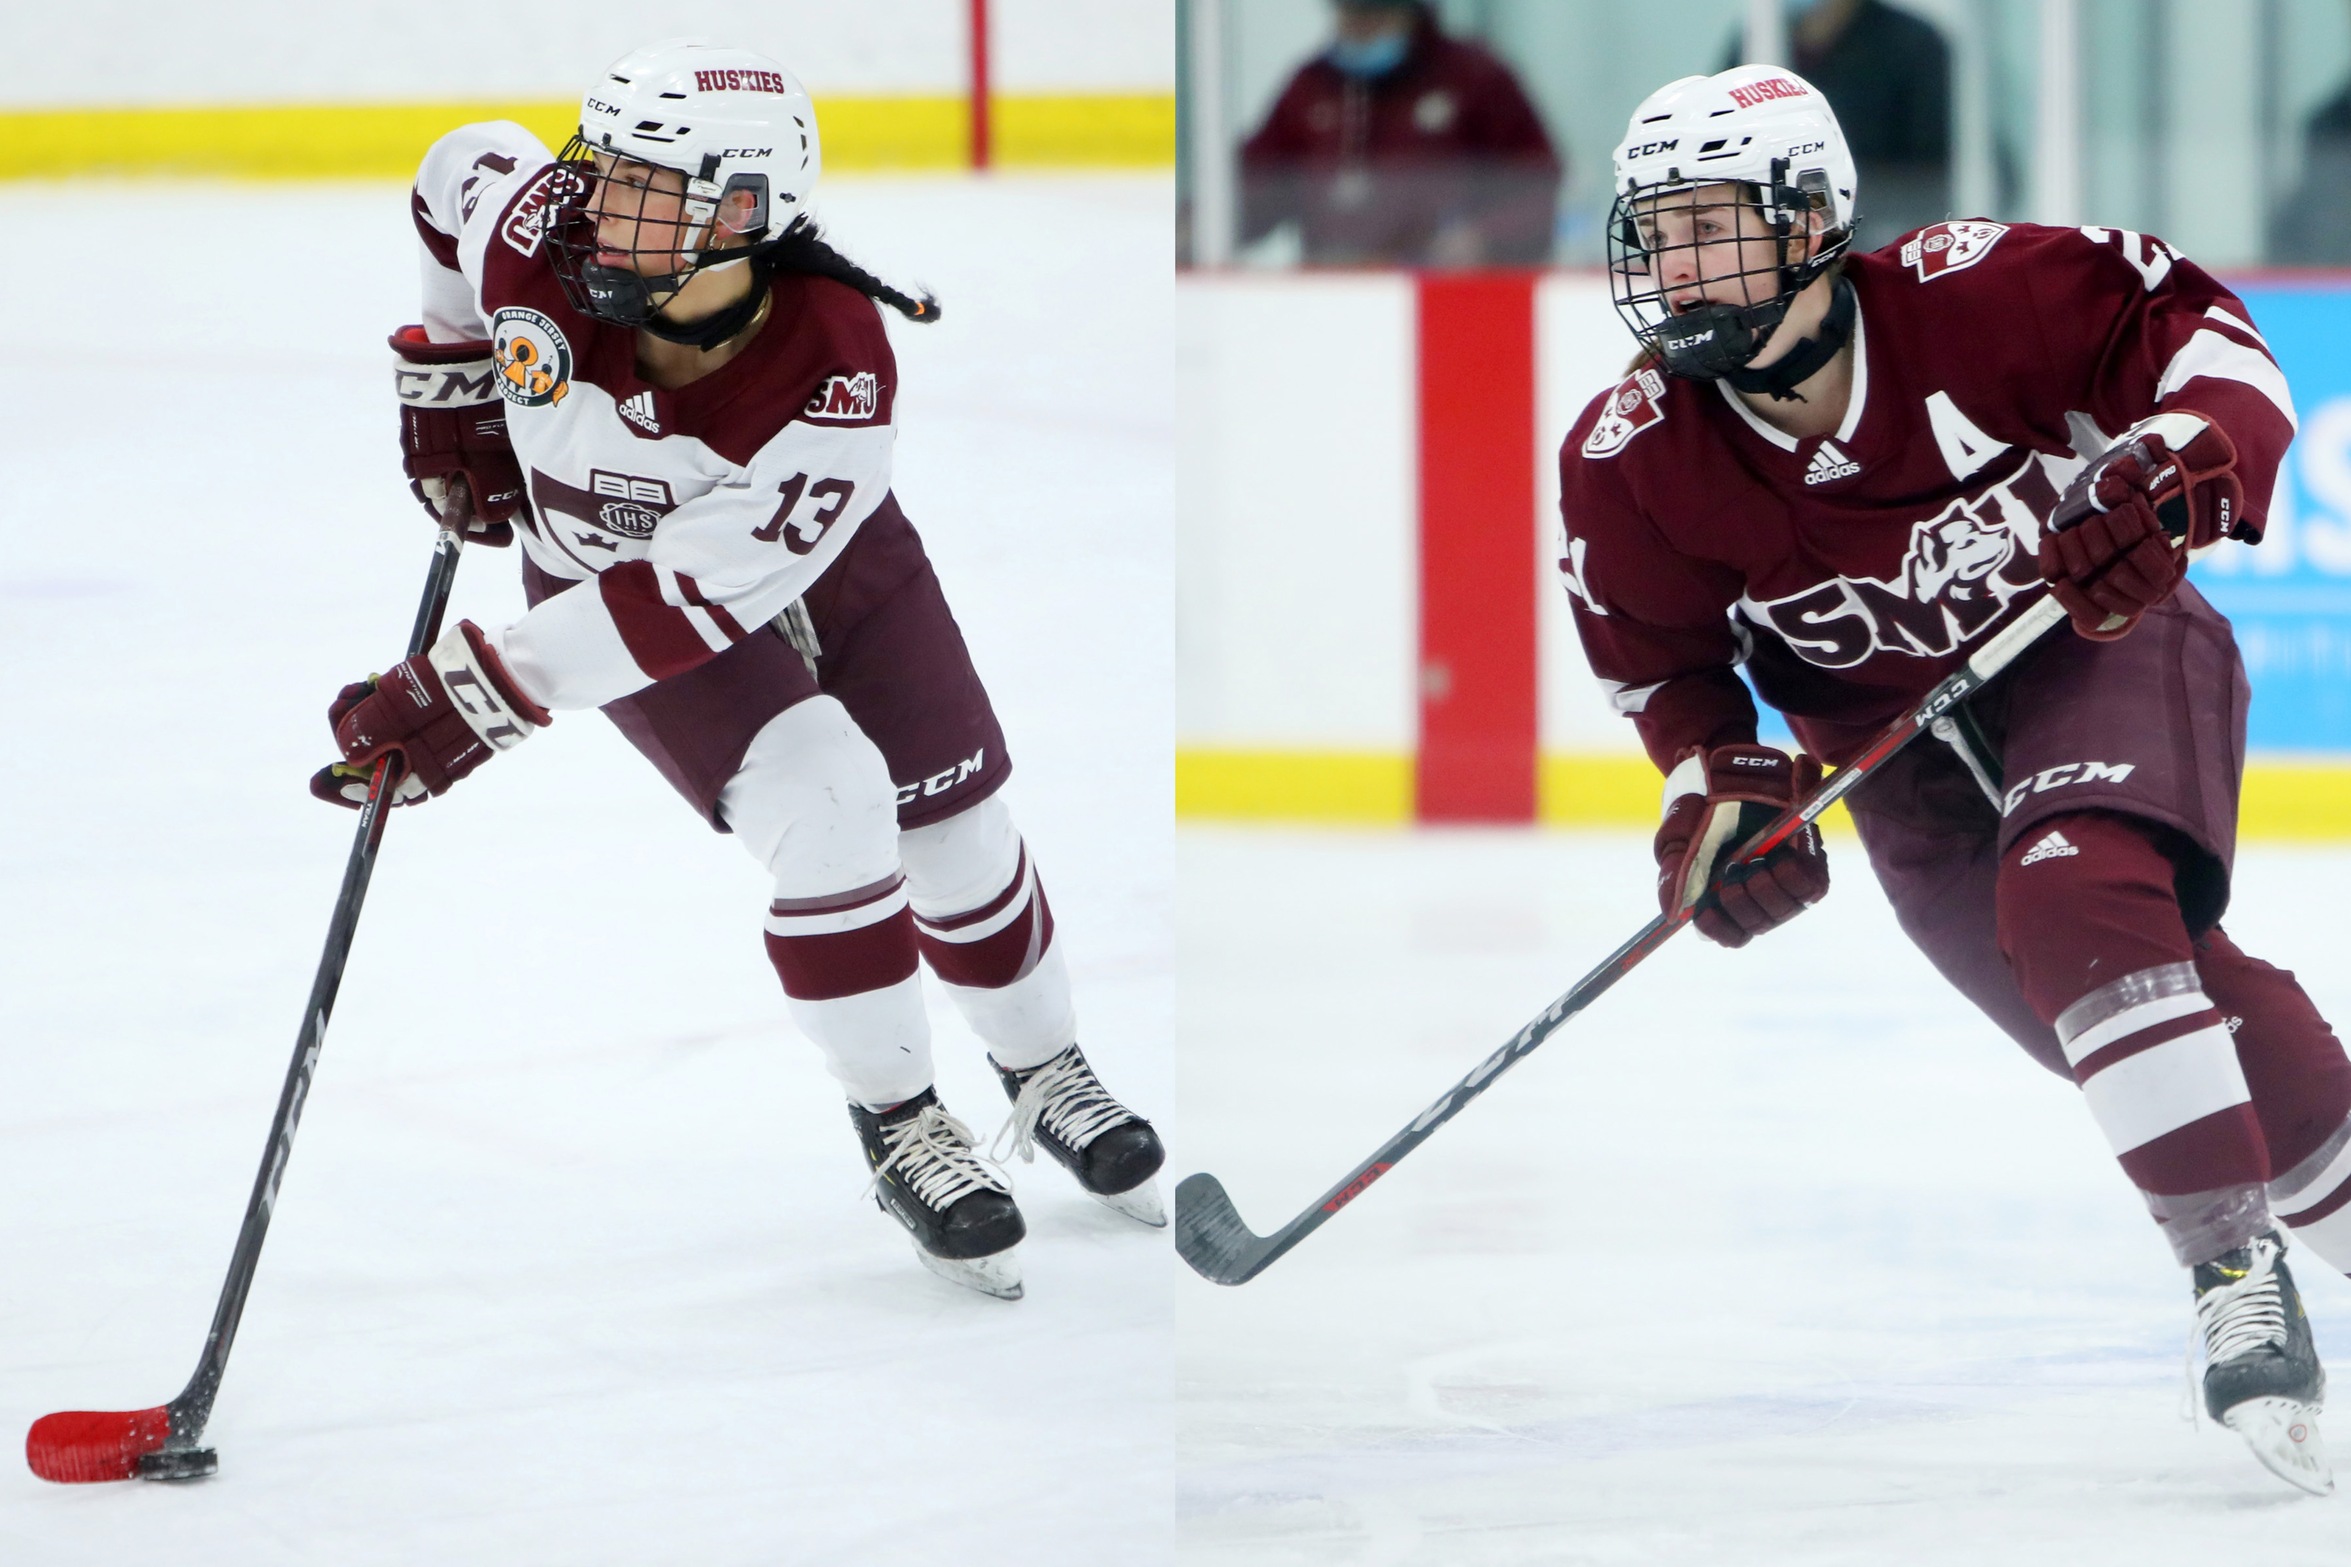 LeBlanc wins AUS Student-Athlete Community Service Award, Demale named First Team All-Star